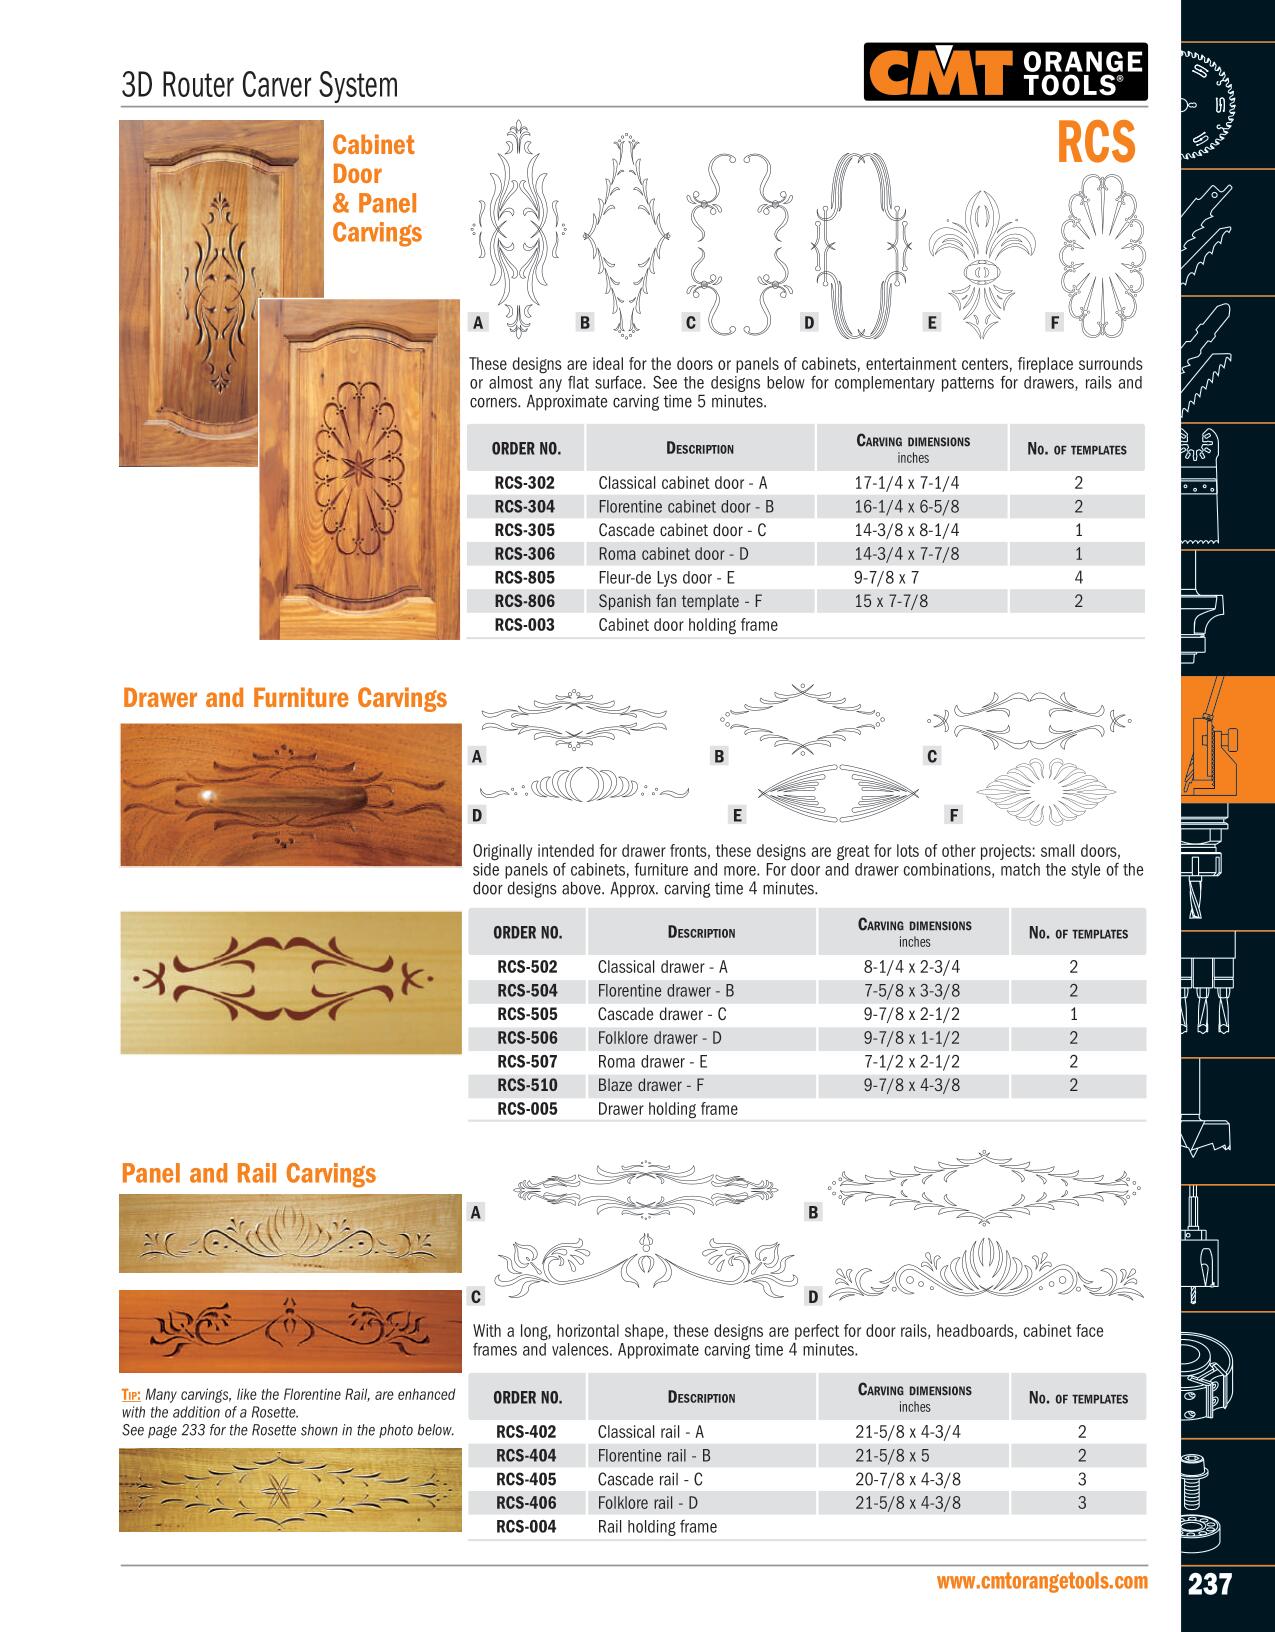 CMT RCS-302 Classical Cabinet Door Templates for Router Carver System